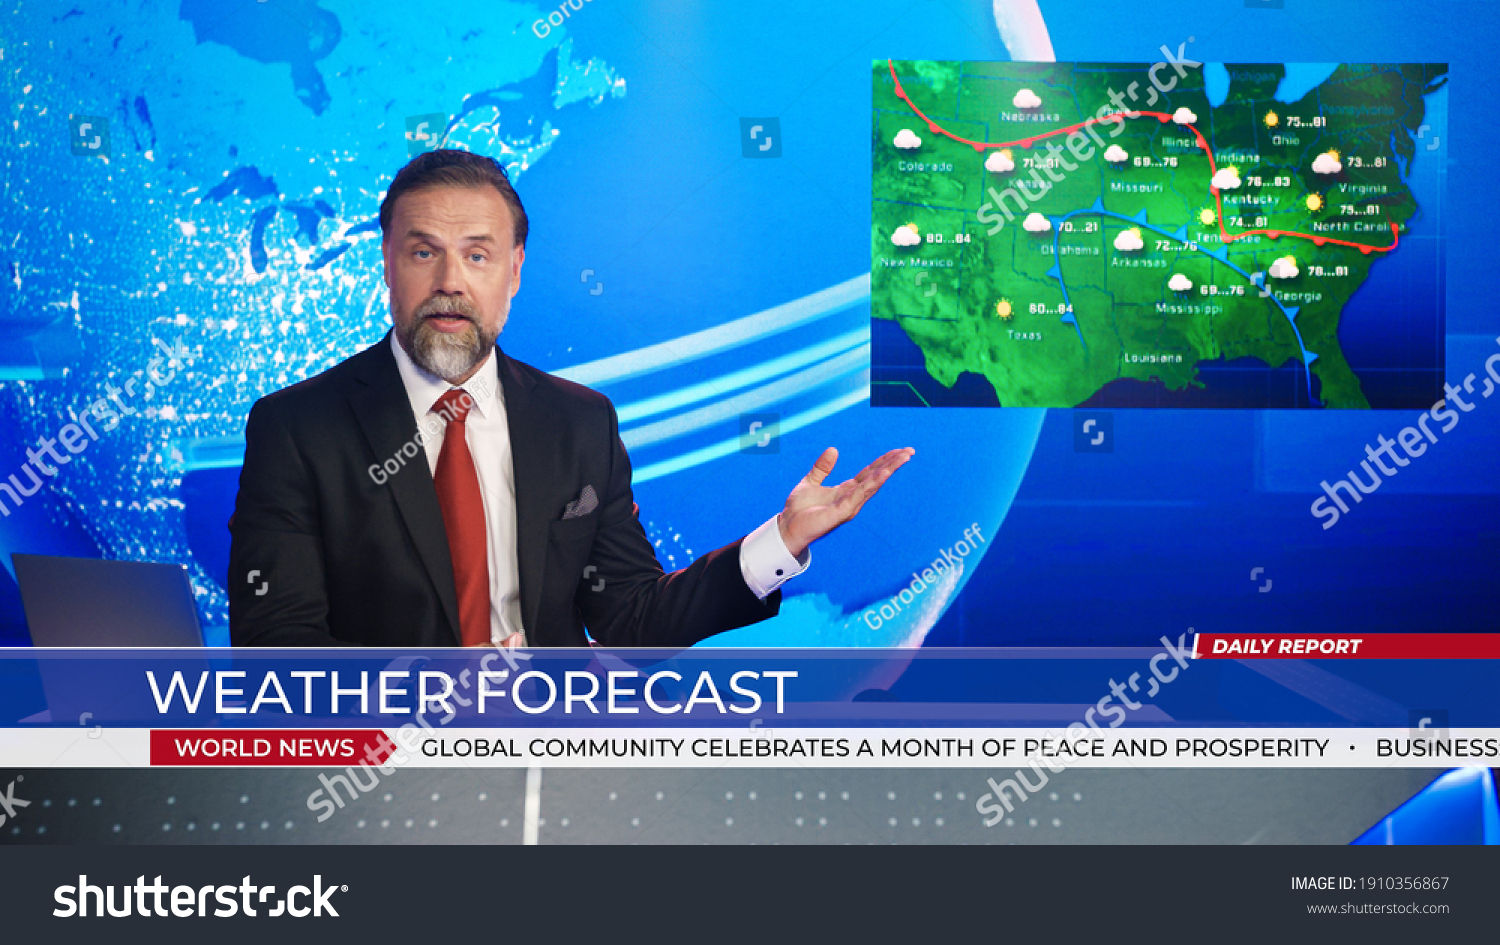 Live News Studio Professional Anchor Reporting on Weather Forecast. Weatherman, Meteorologist, Reporter in Television Channel Newsroom with Video Screen Showing Weather Synoptic Map Chart for U.S. #1910356867